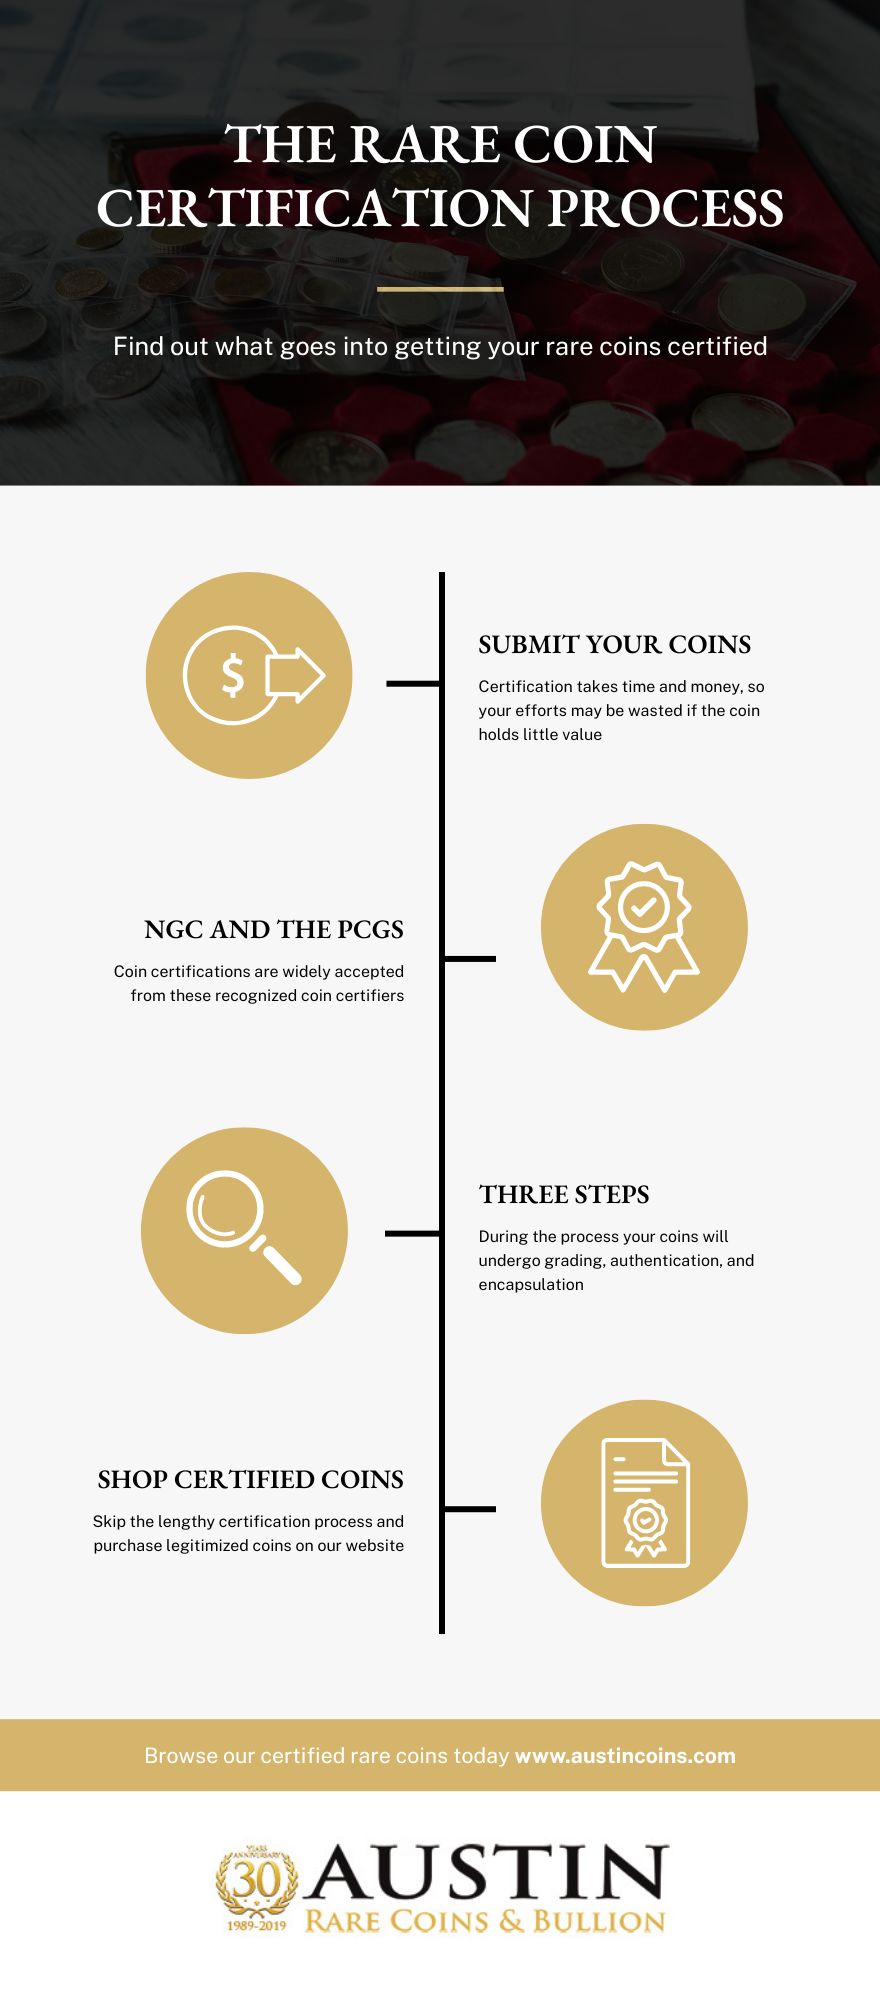 The Rare Coin Certification Process